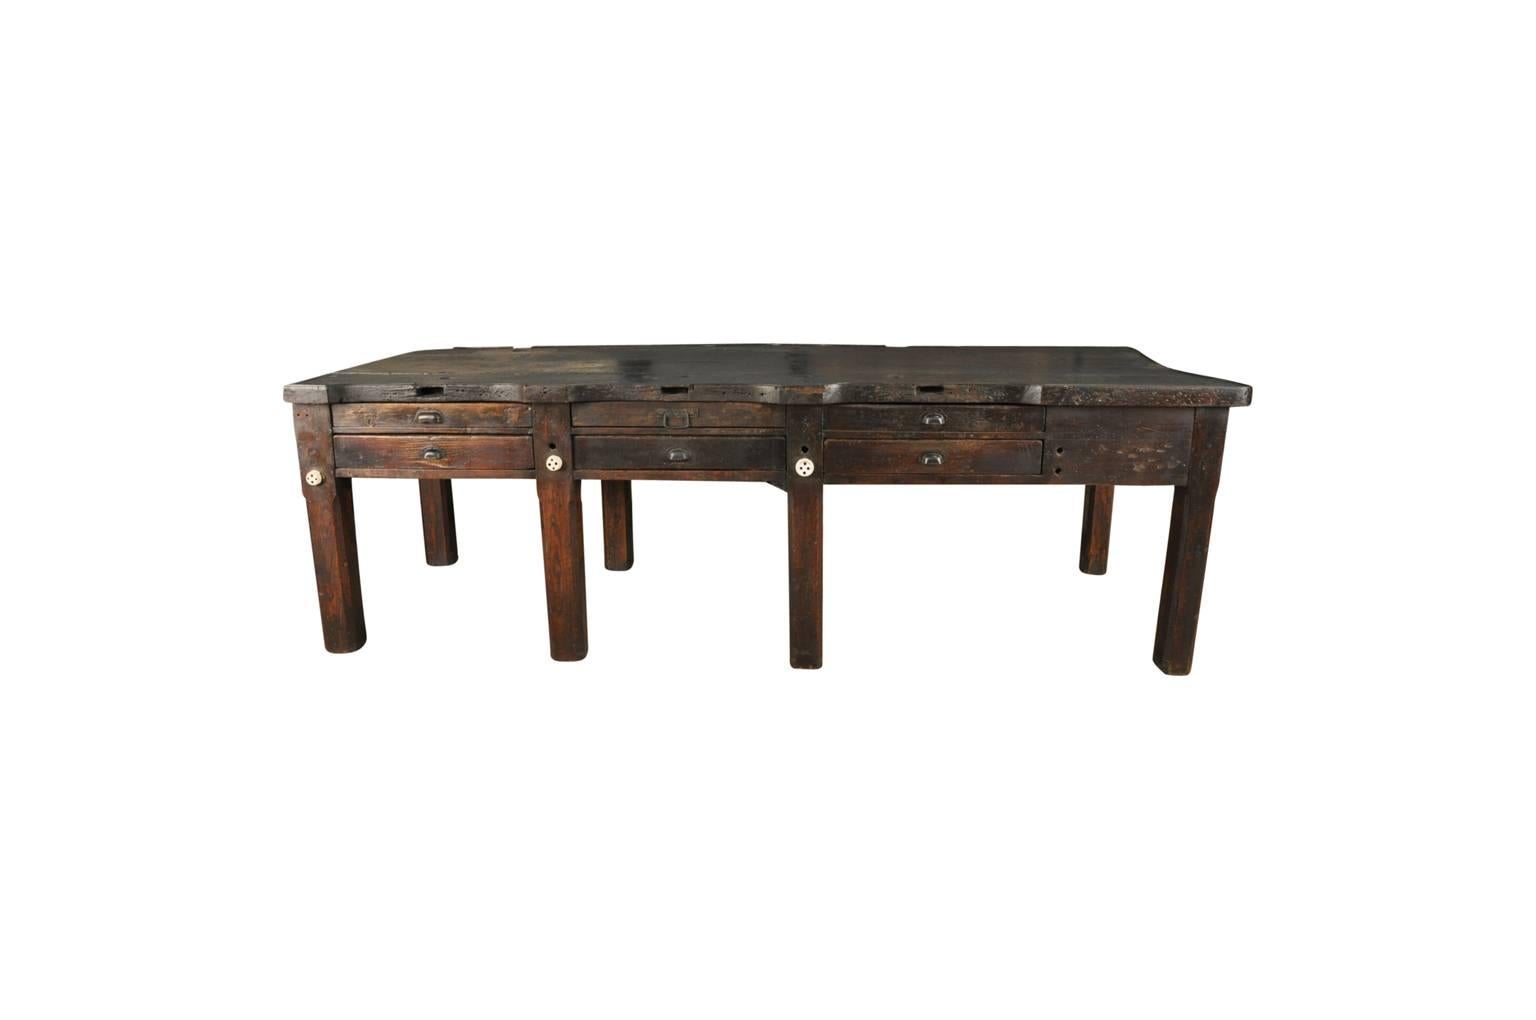 A fantastic and monumental later 19th century French jeweler's worktable. Soundly constructed in richly stained beech and pine woods. This piece serves as a fabulous kitchen island or bar table. Terrific charm and character.